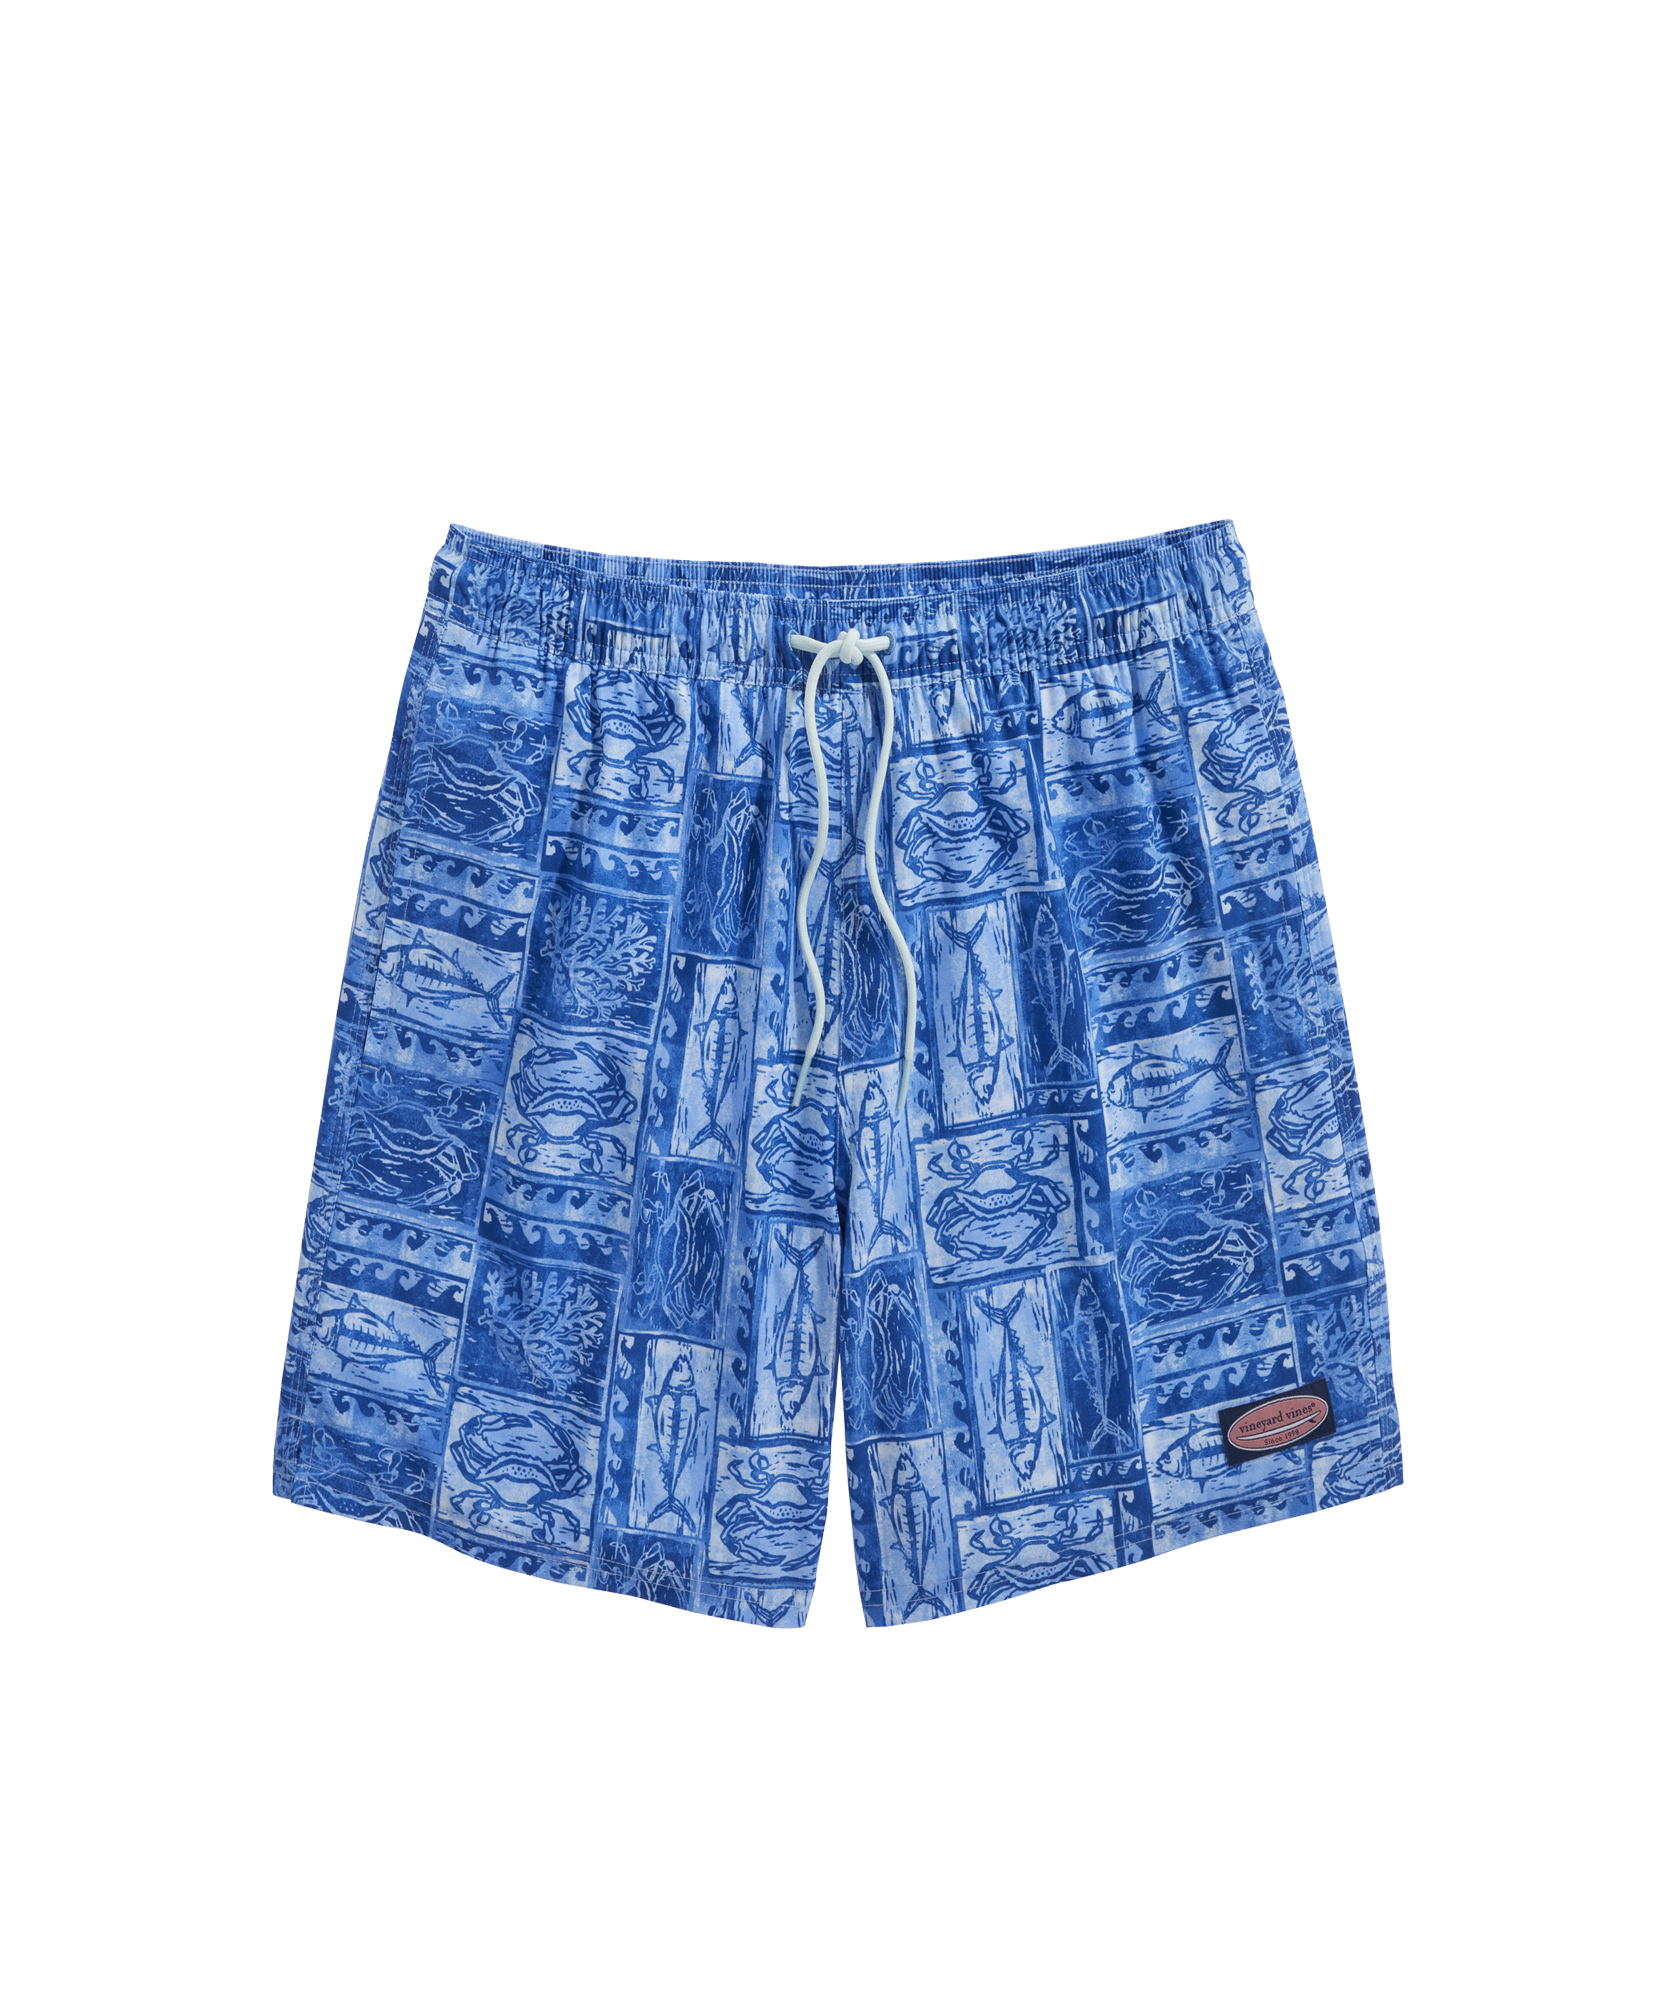 Shop OUTLET Printed Chappy Swim Trunks at vineyard vines